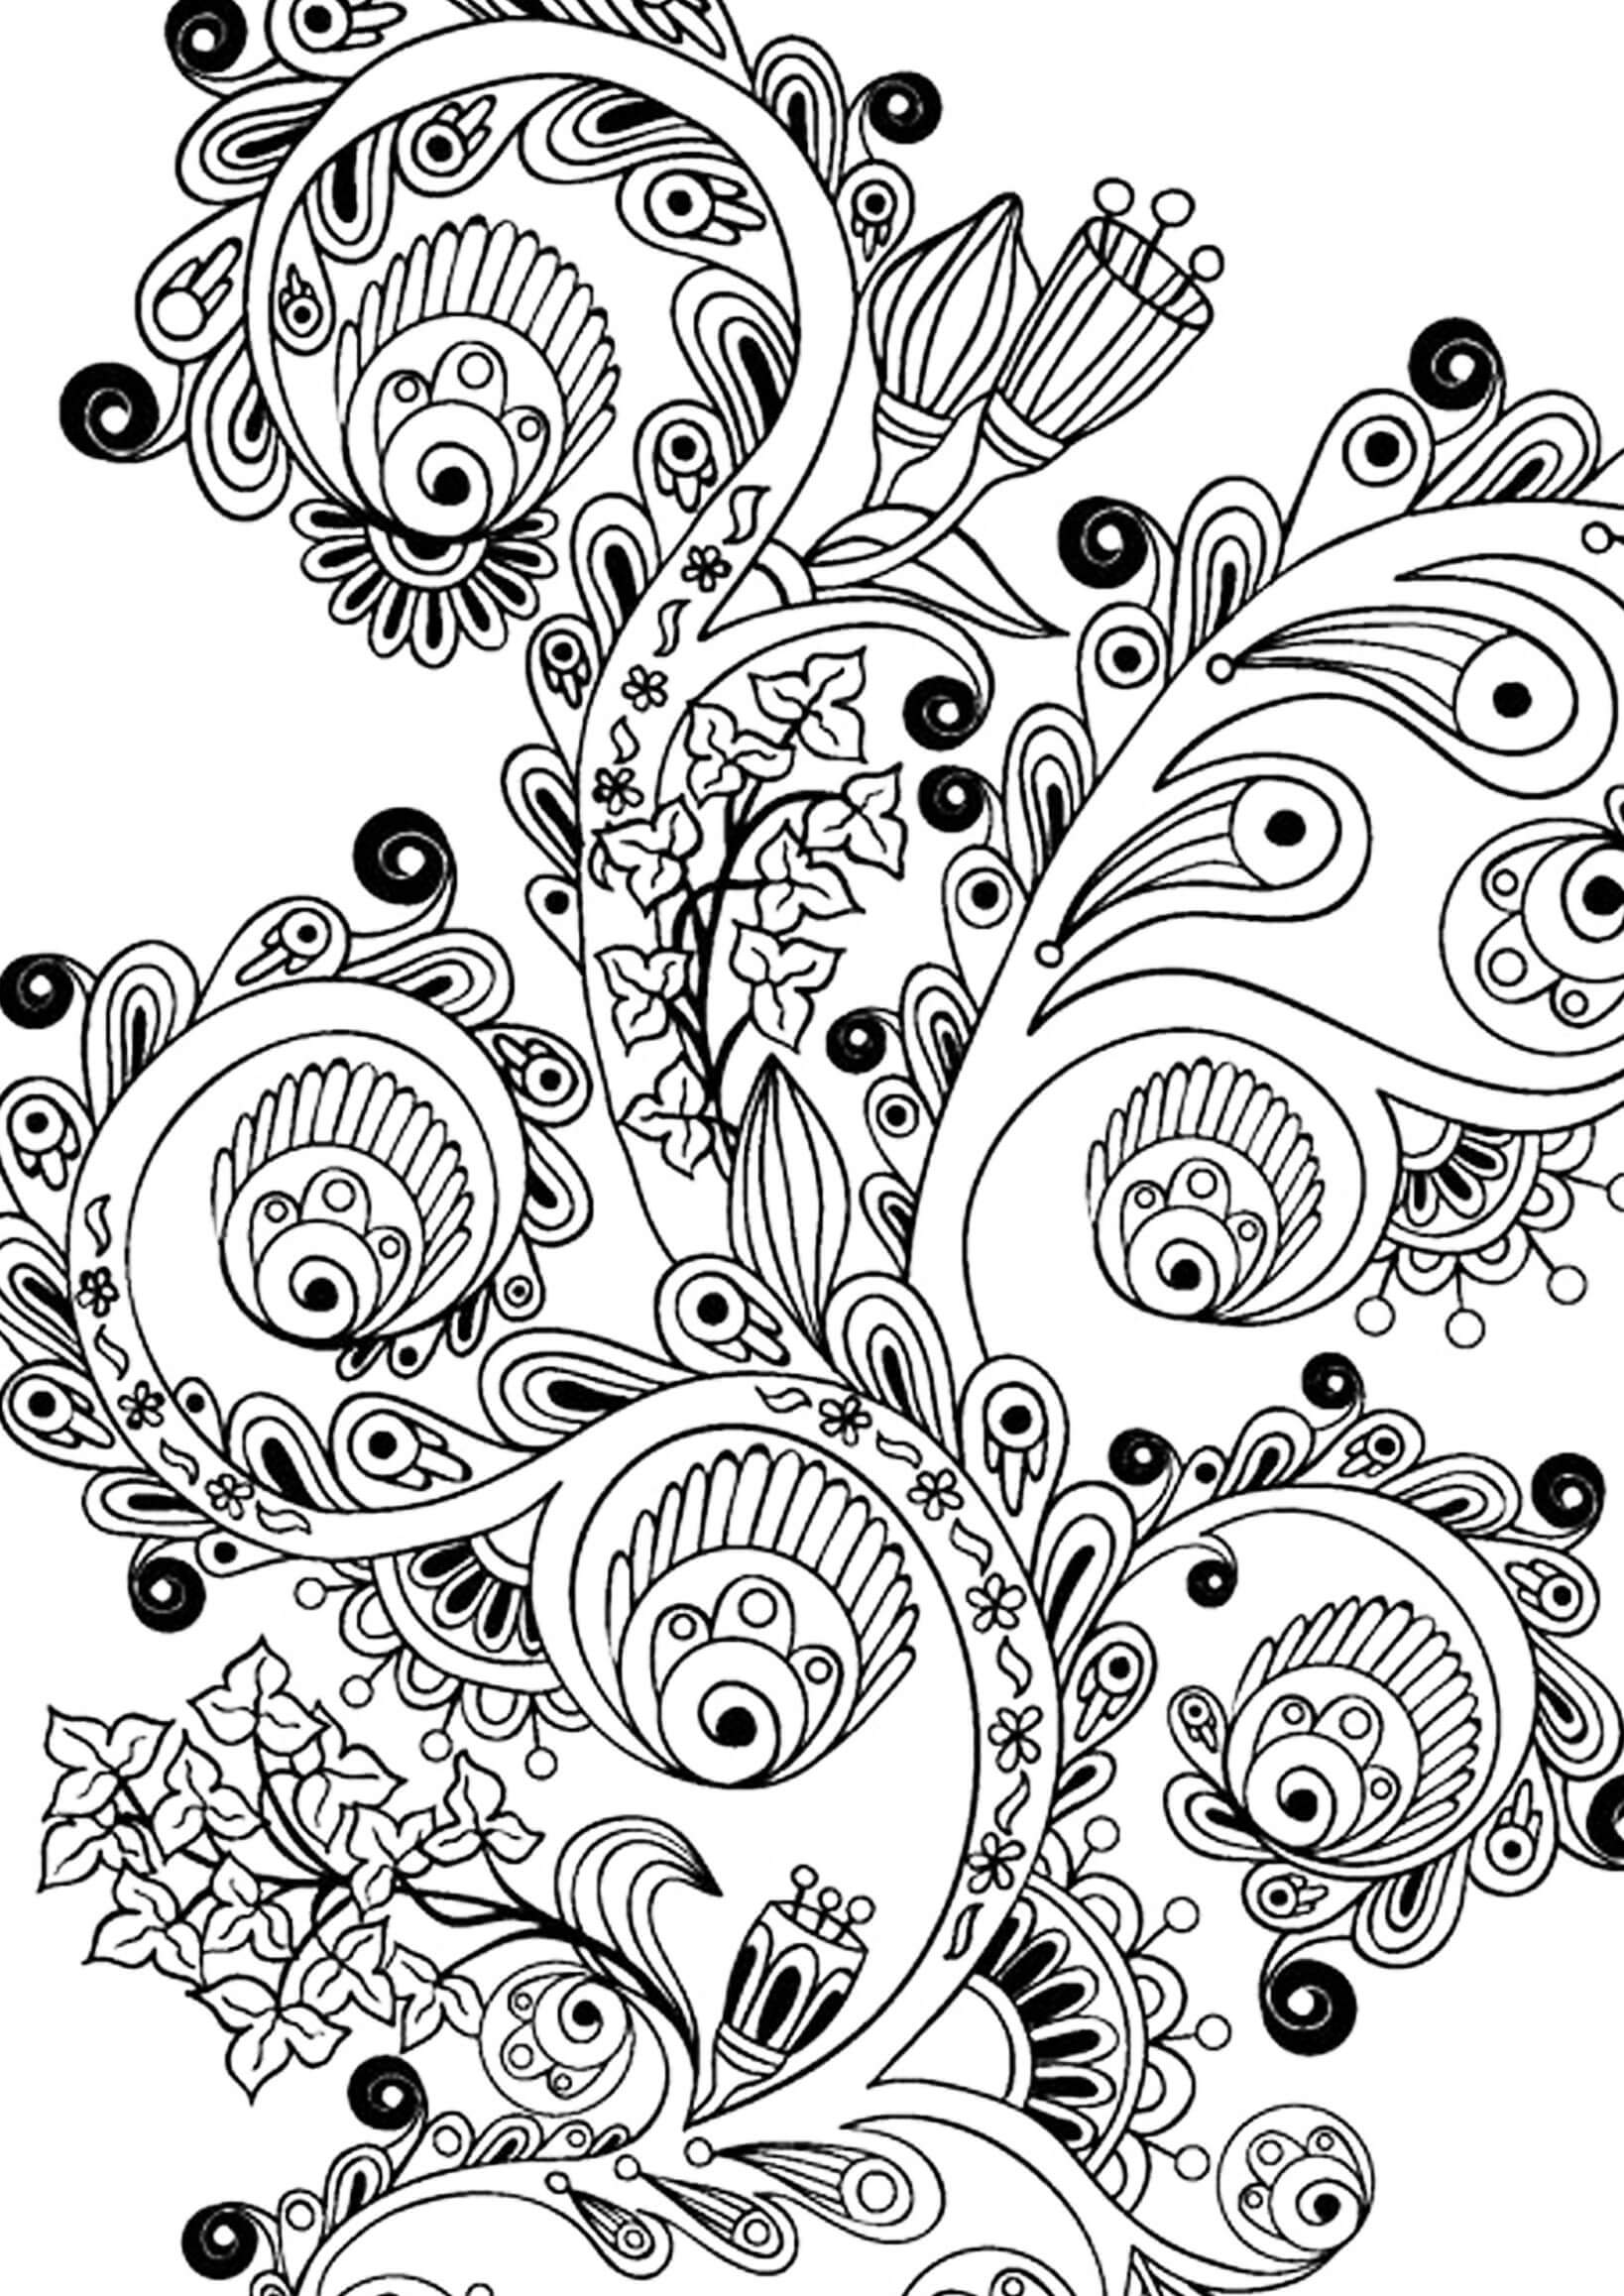 Printable Flower Design for Adult Coloring